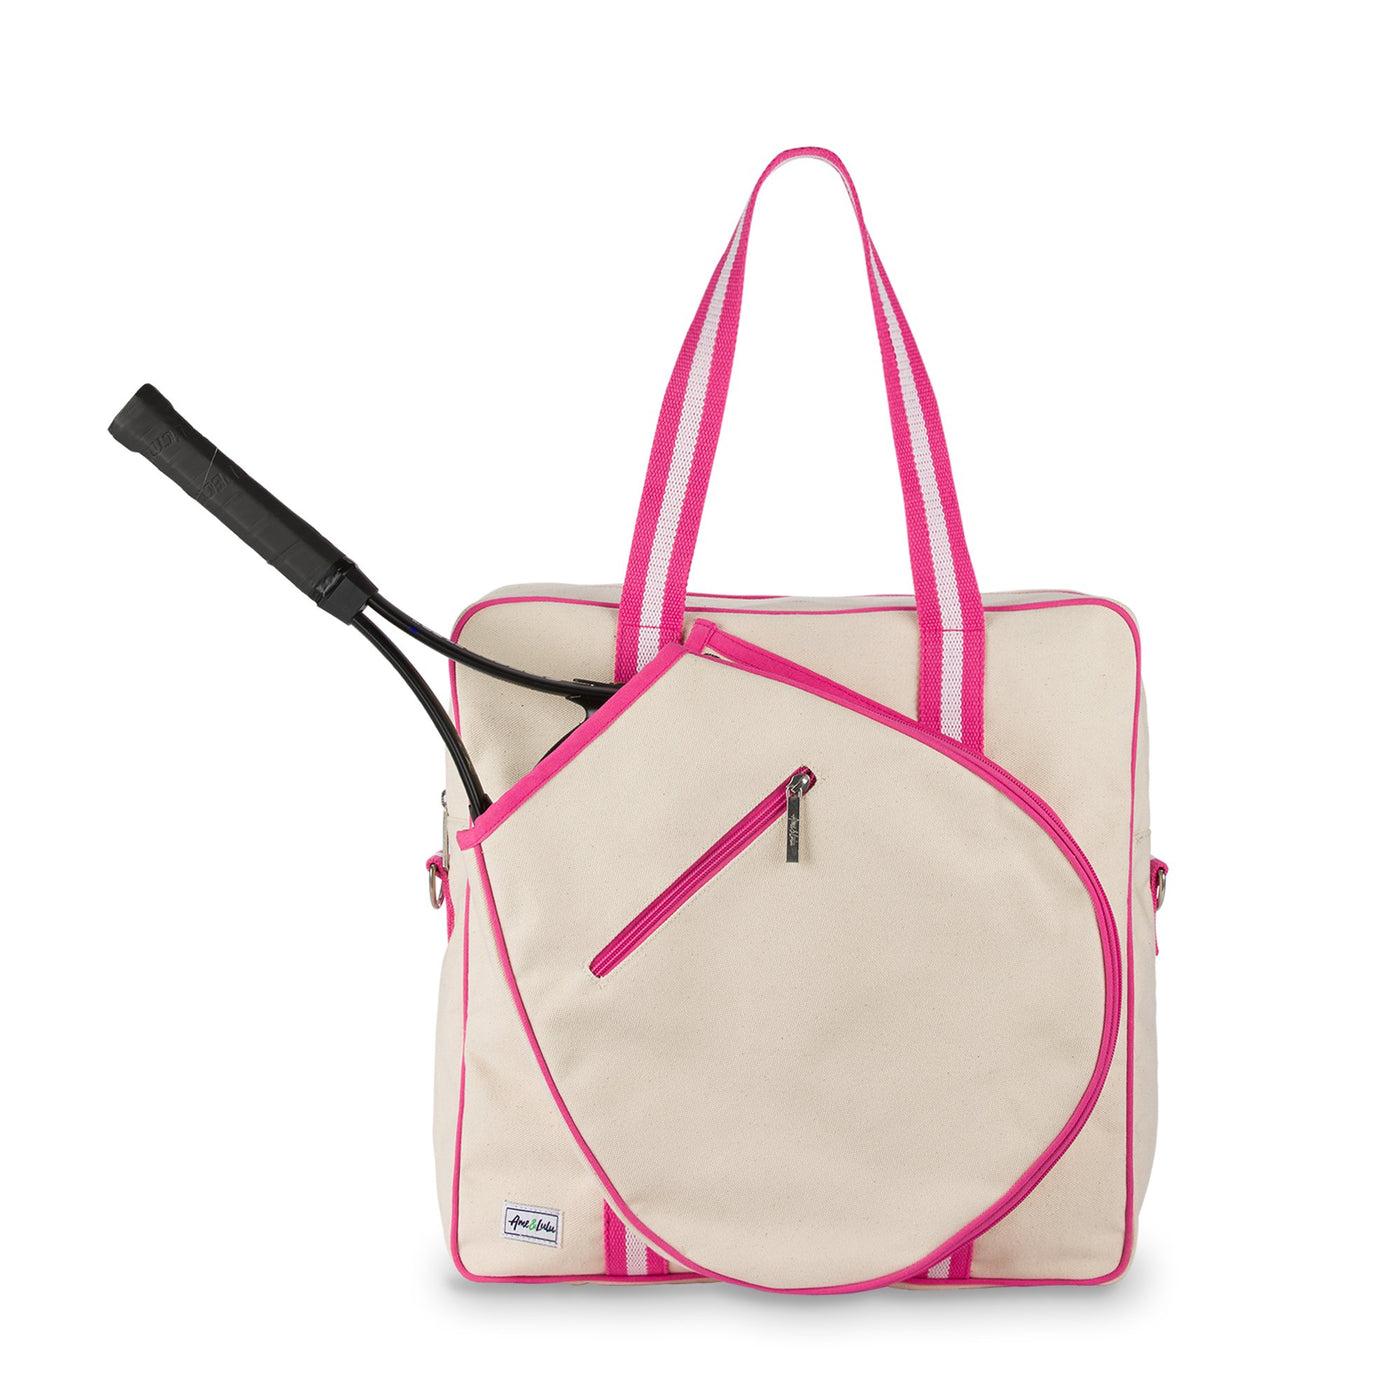 Front view of large canvas tennis tote with front pocket for tennis racquet. Tote has hot pink trim and handles.